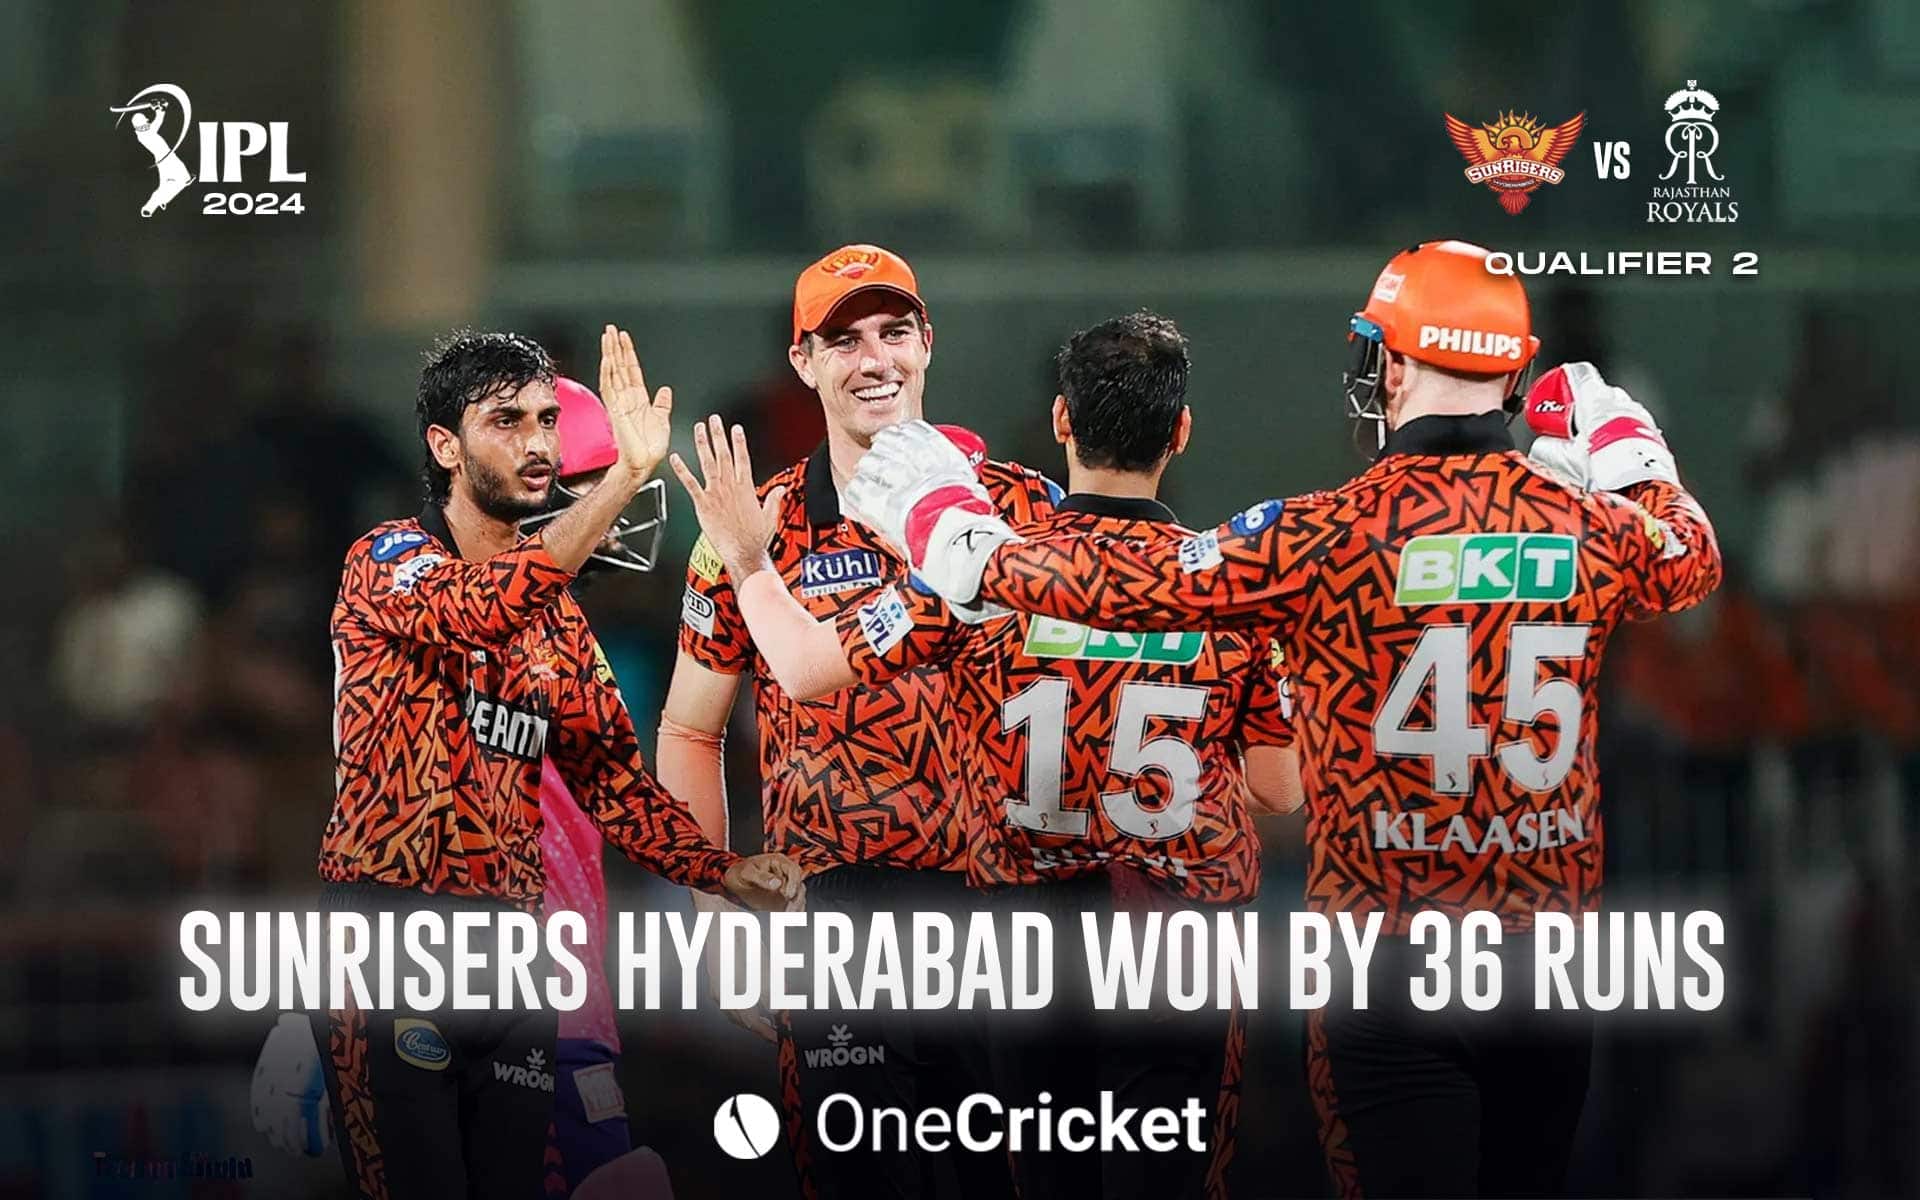 Sunrisers Hyderabad win by 36 runs against RR (OneCricket)